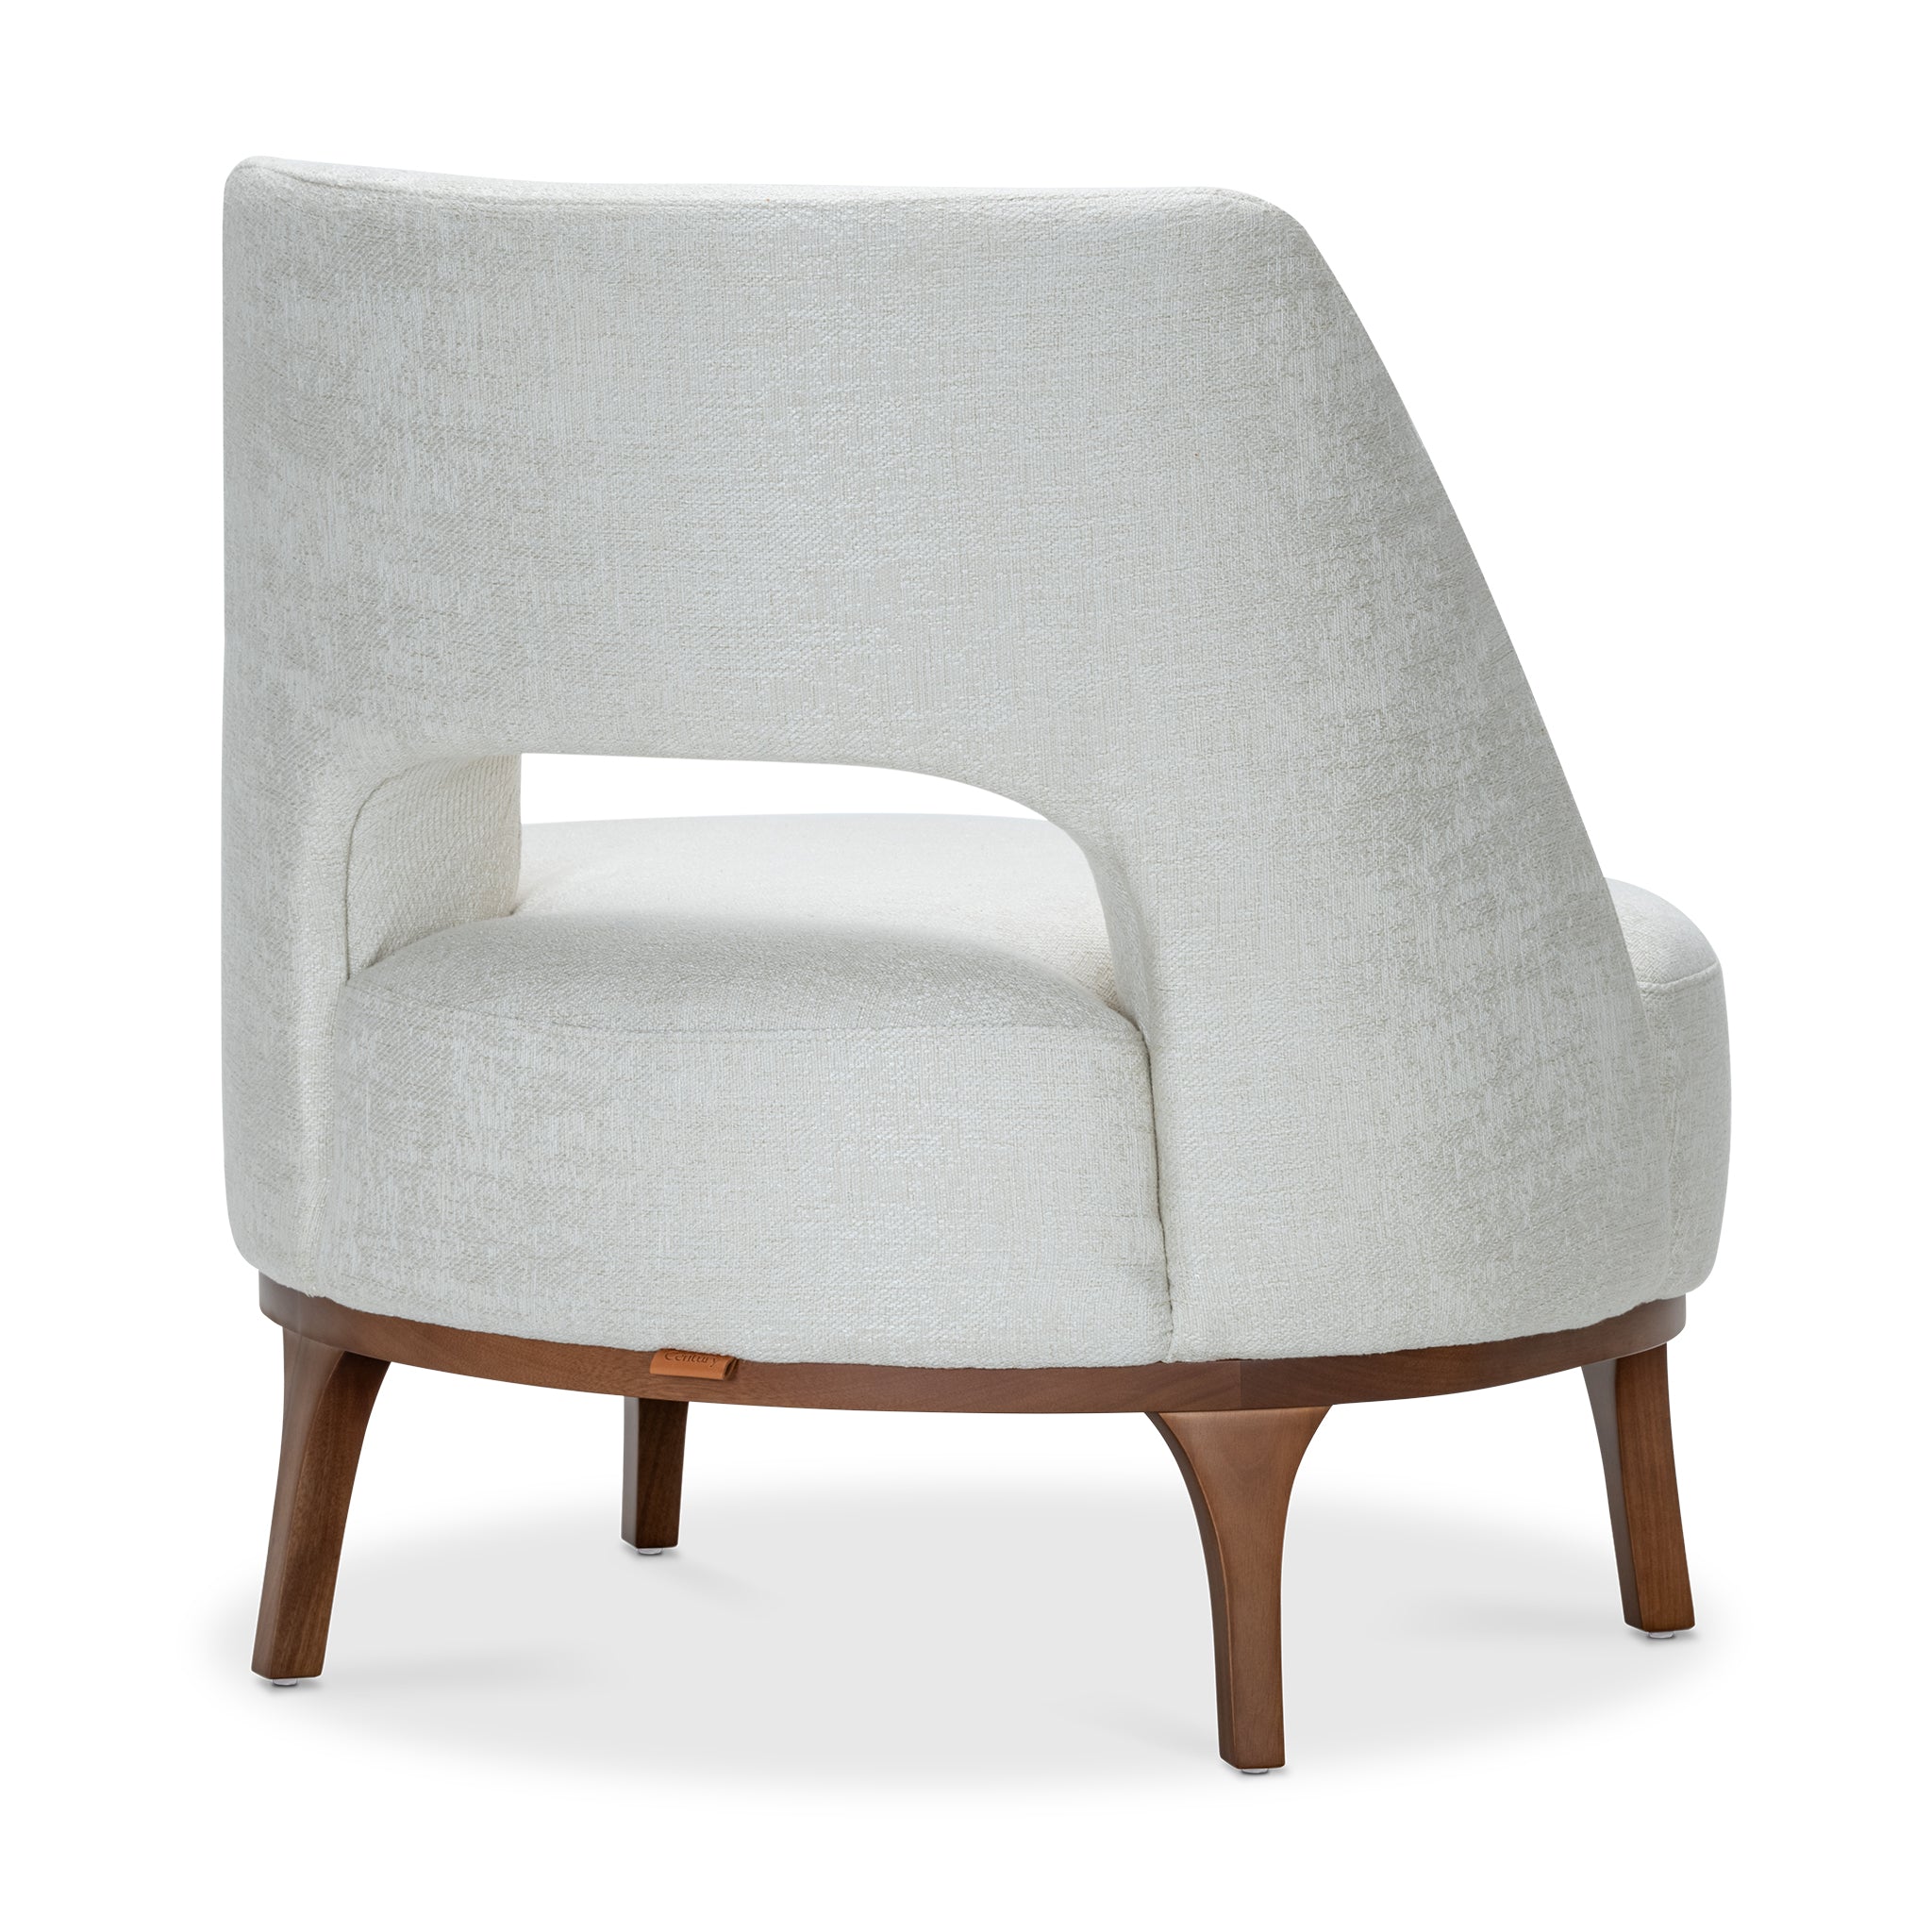 that's living collections romenia beige jacquard armchair chairs 